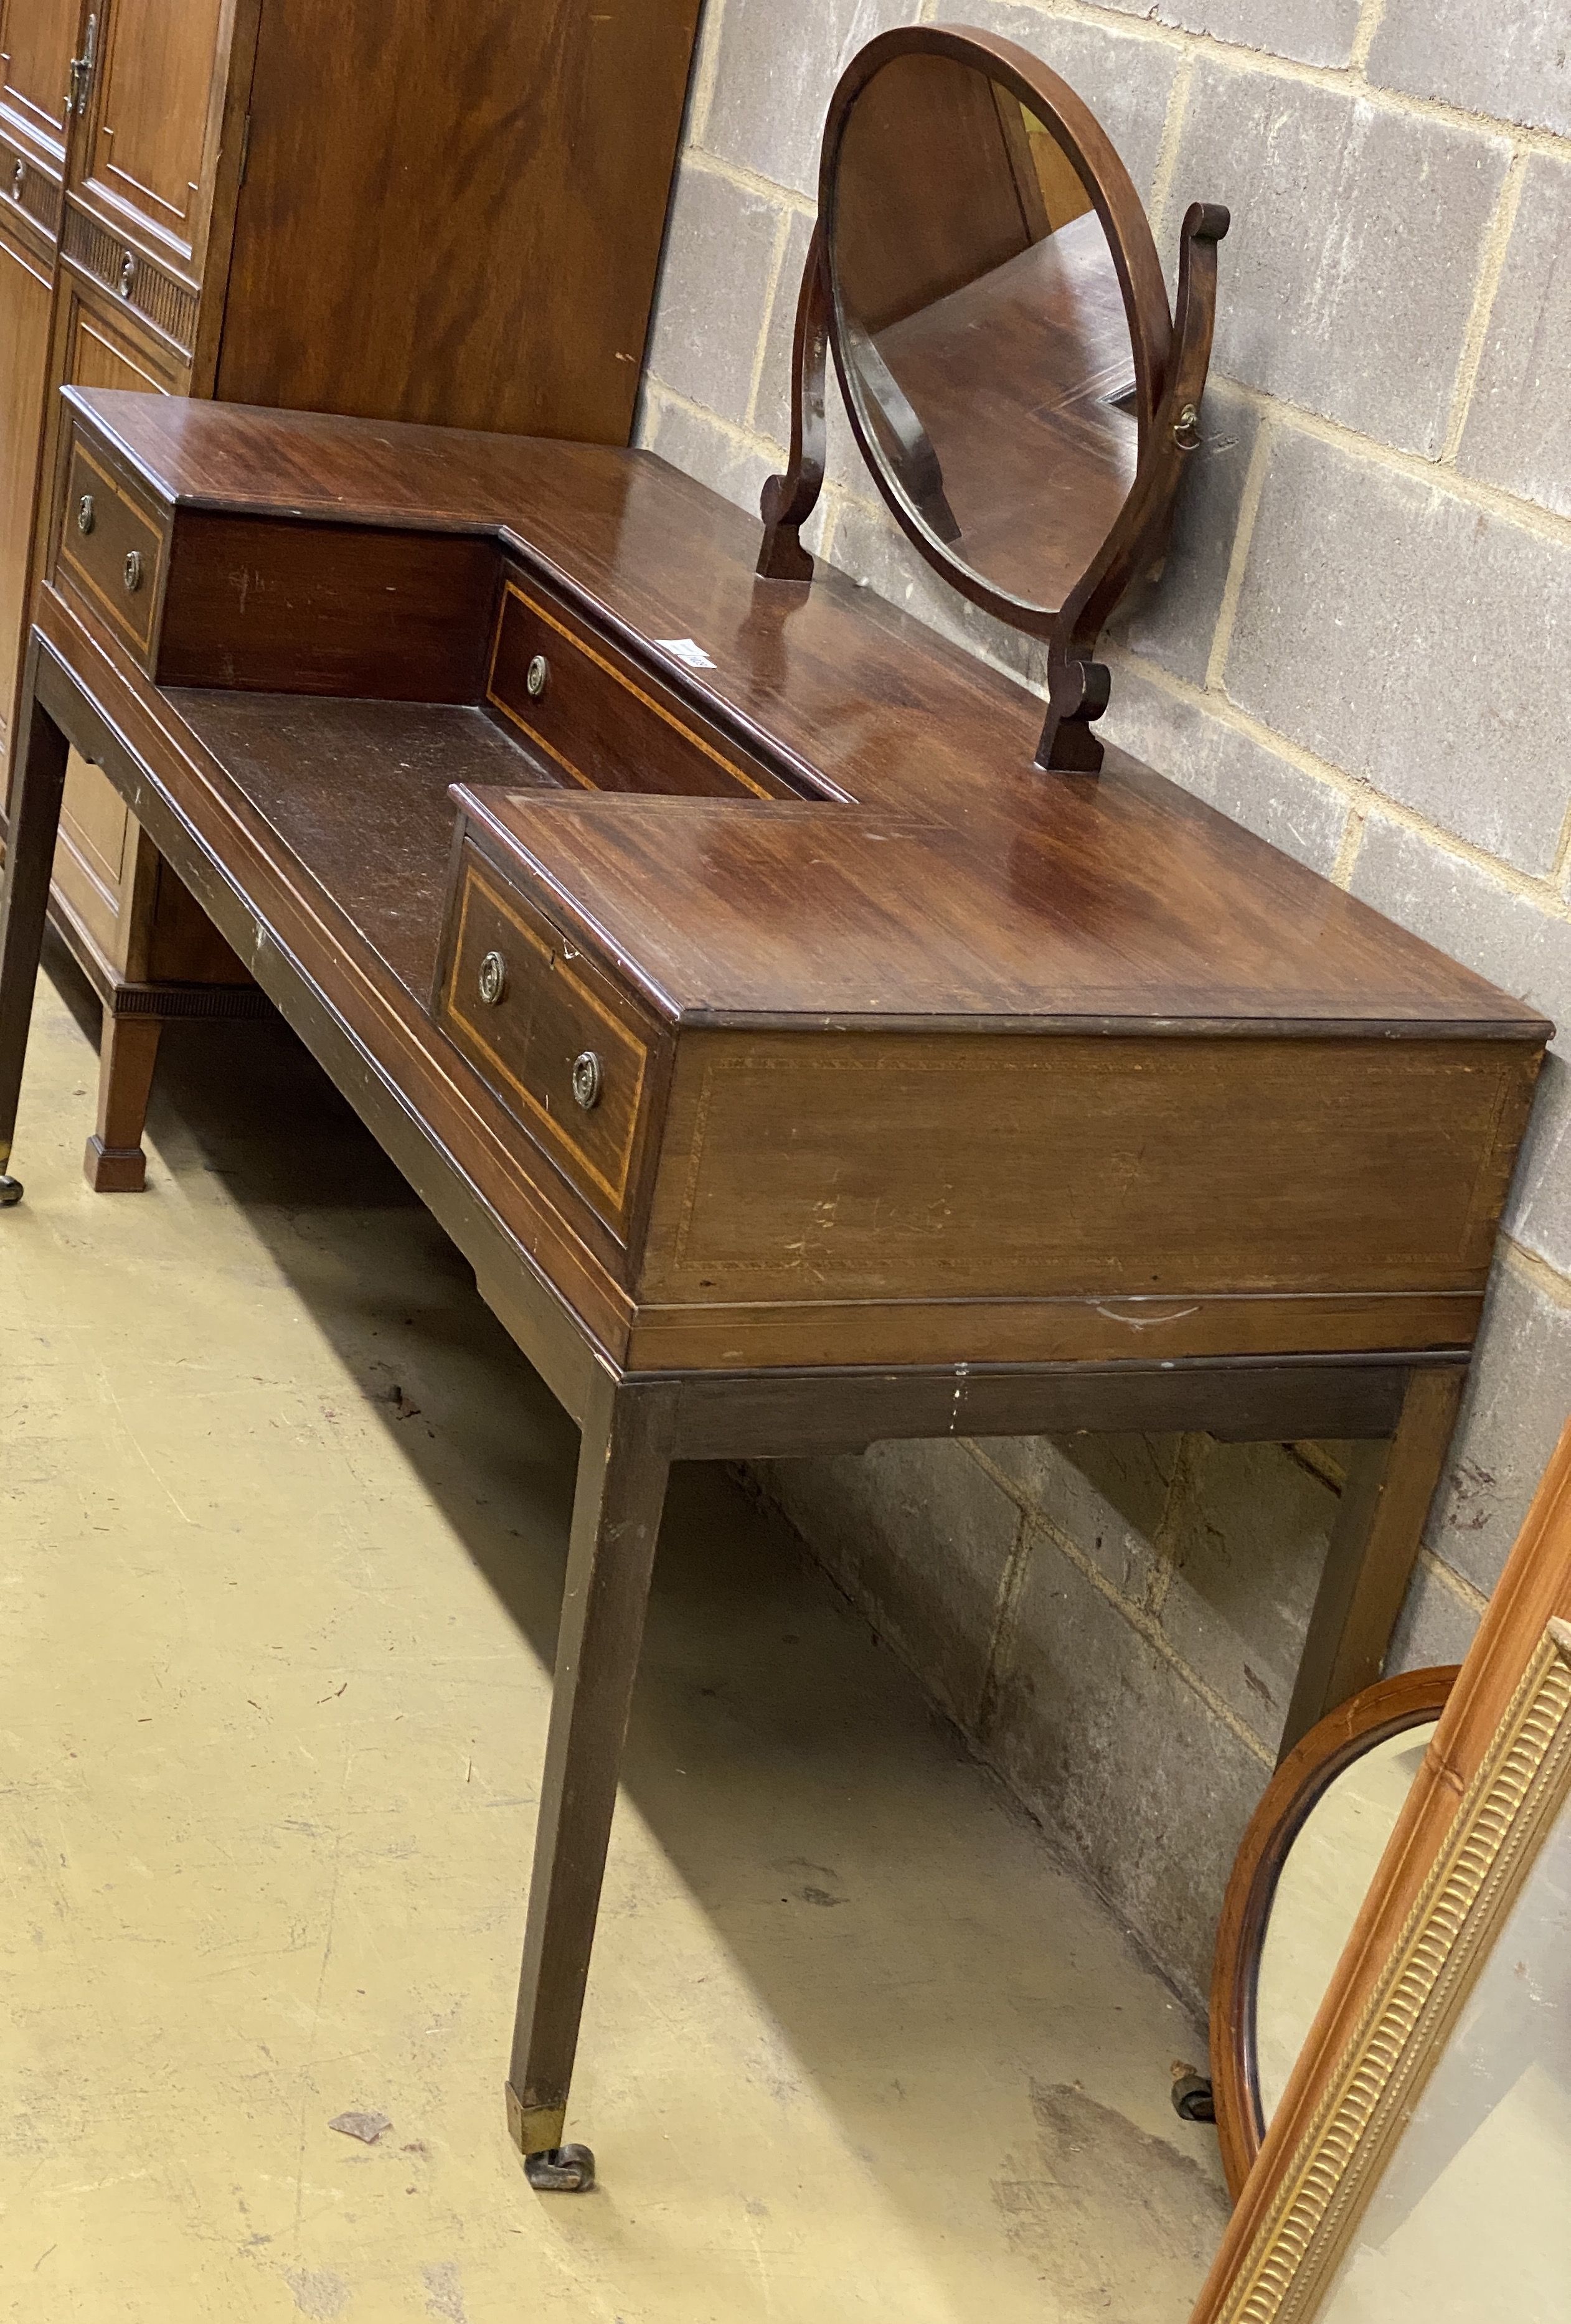 A mid 19th century mahogany dressing table, converted from a square piano